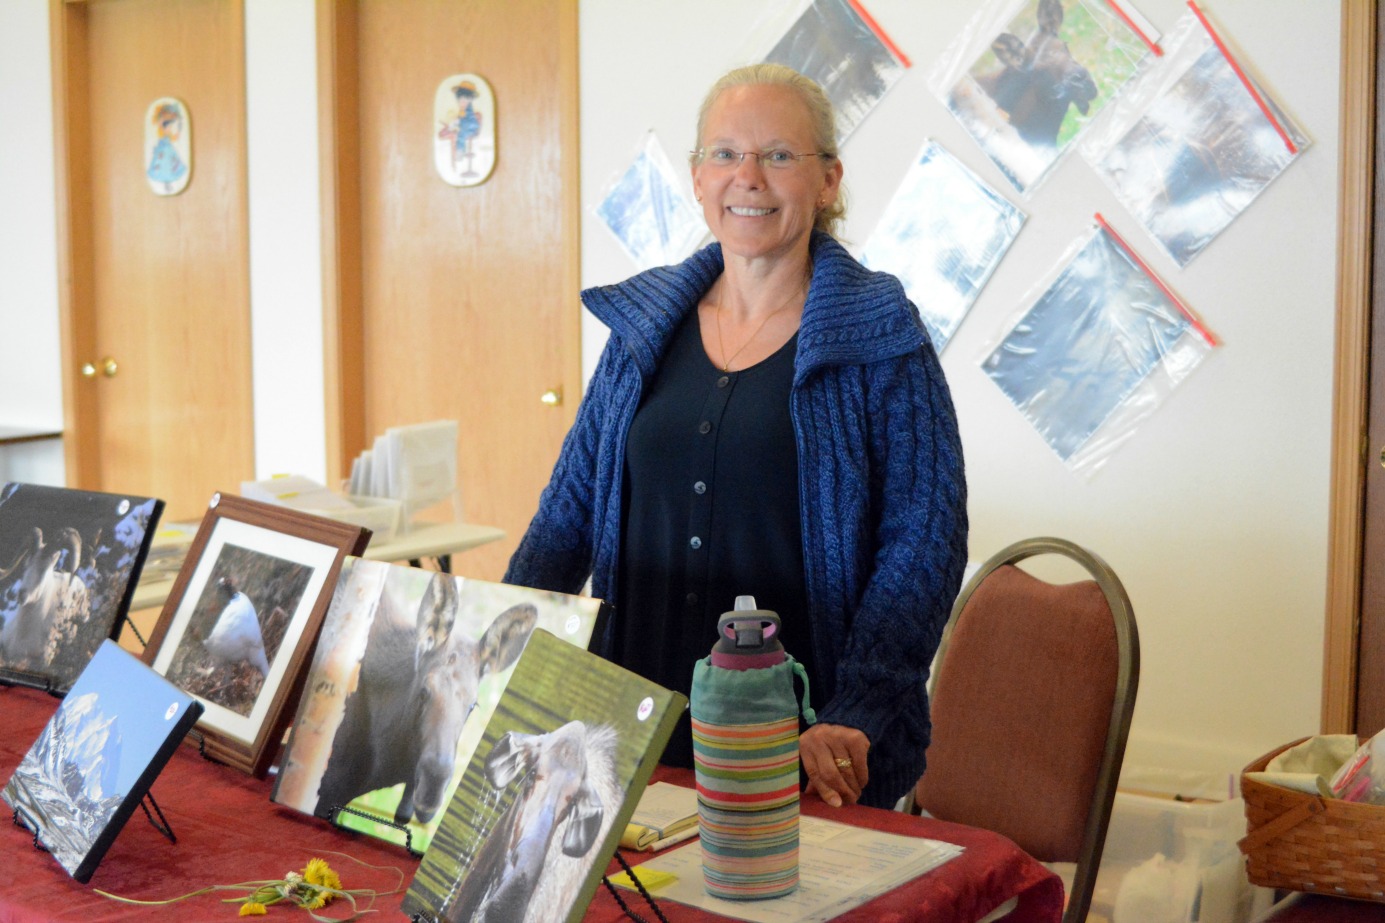 hotographer Vicki Swenson stands at her booth at the Swan Market on Tuesday. Set up for cruise ship days this summer, the market is open 10 a.m.-3 p.m. at the Homer Elks Lodge when the Maasdam is in port. For renting booths or more information, contact Adulai Salam, owner and manager, at 299-4576 or email theswanmarket@gmail.com.-Photo by Michael Armstrong, Homer News